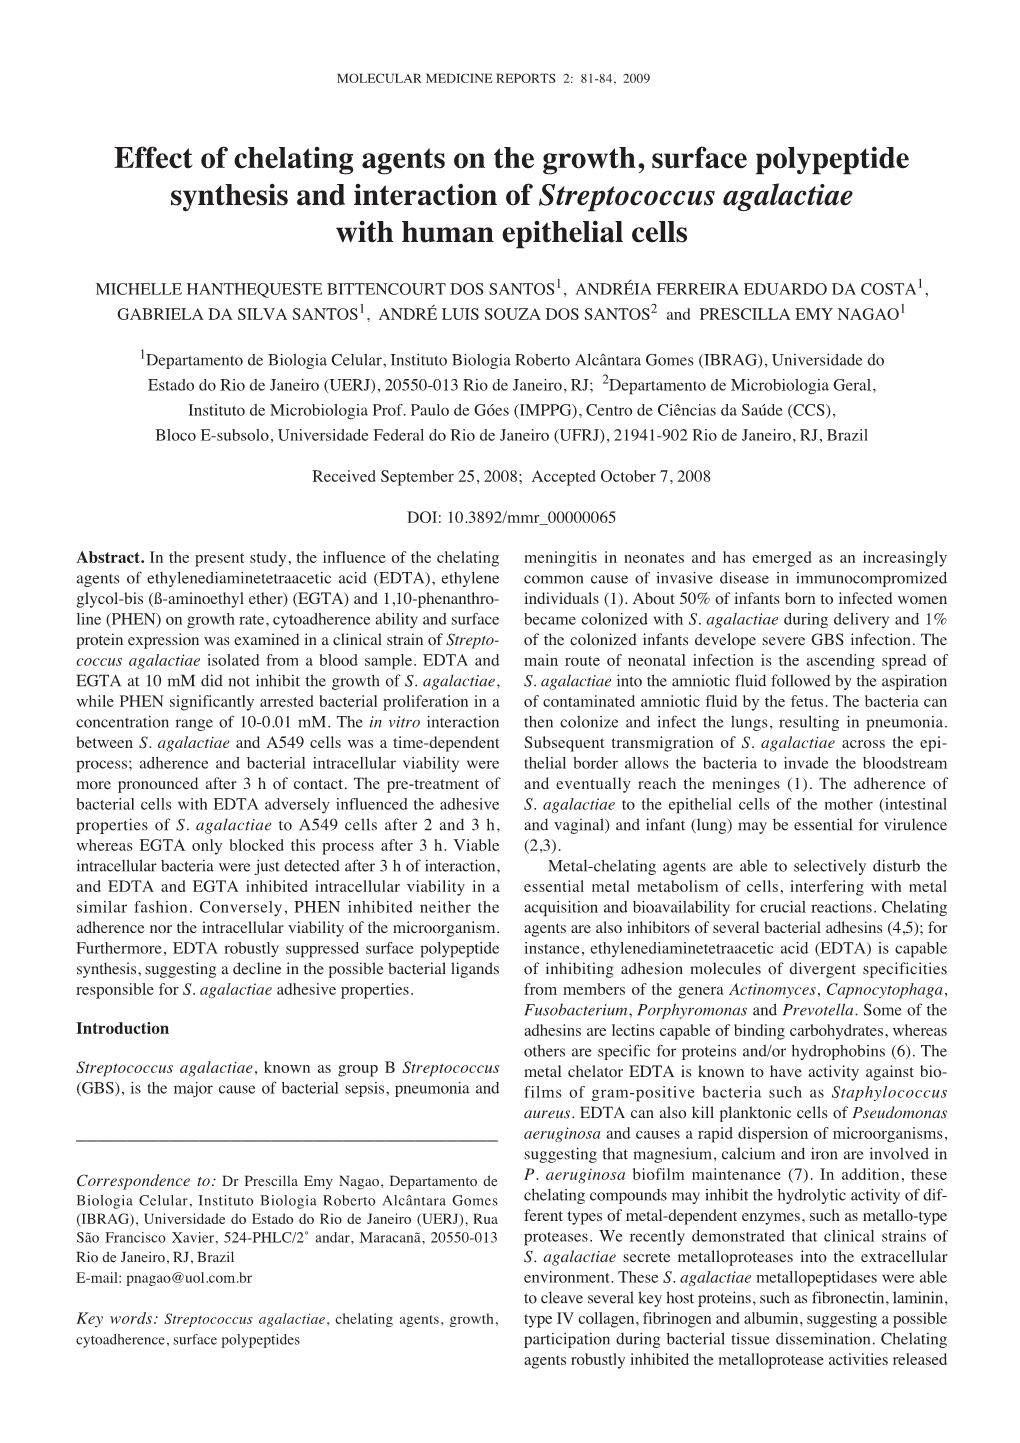 Effect of Chelating Agents on the Growth, Surface Polypeptide Synthesis and Interaction of Streptococcus Agalactiae with Human Epithelial Cells